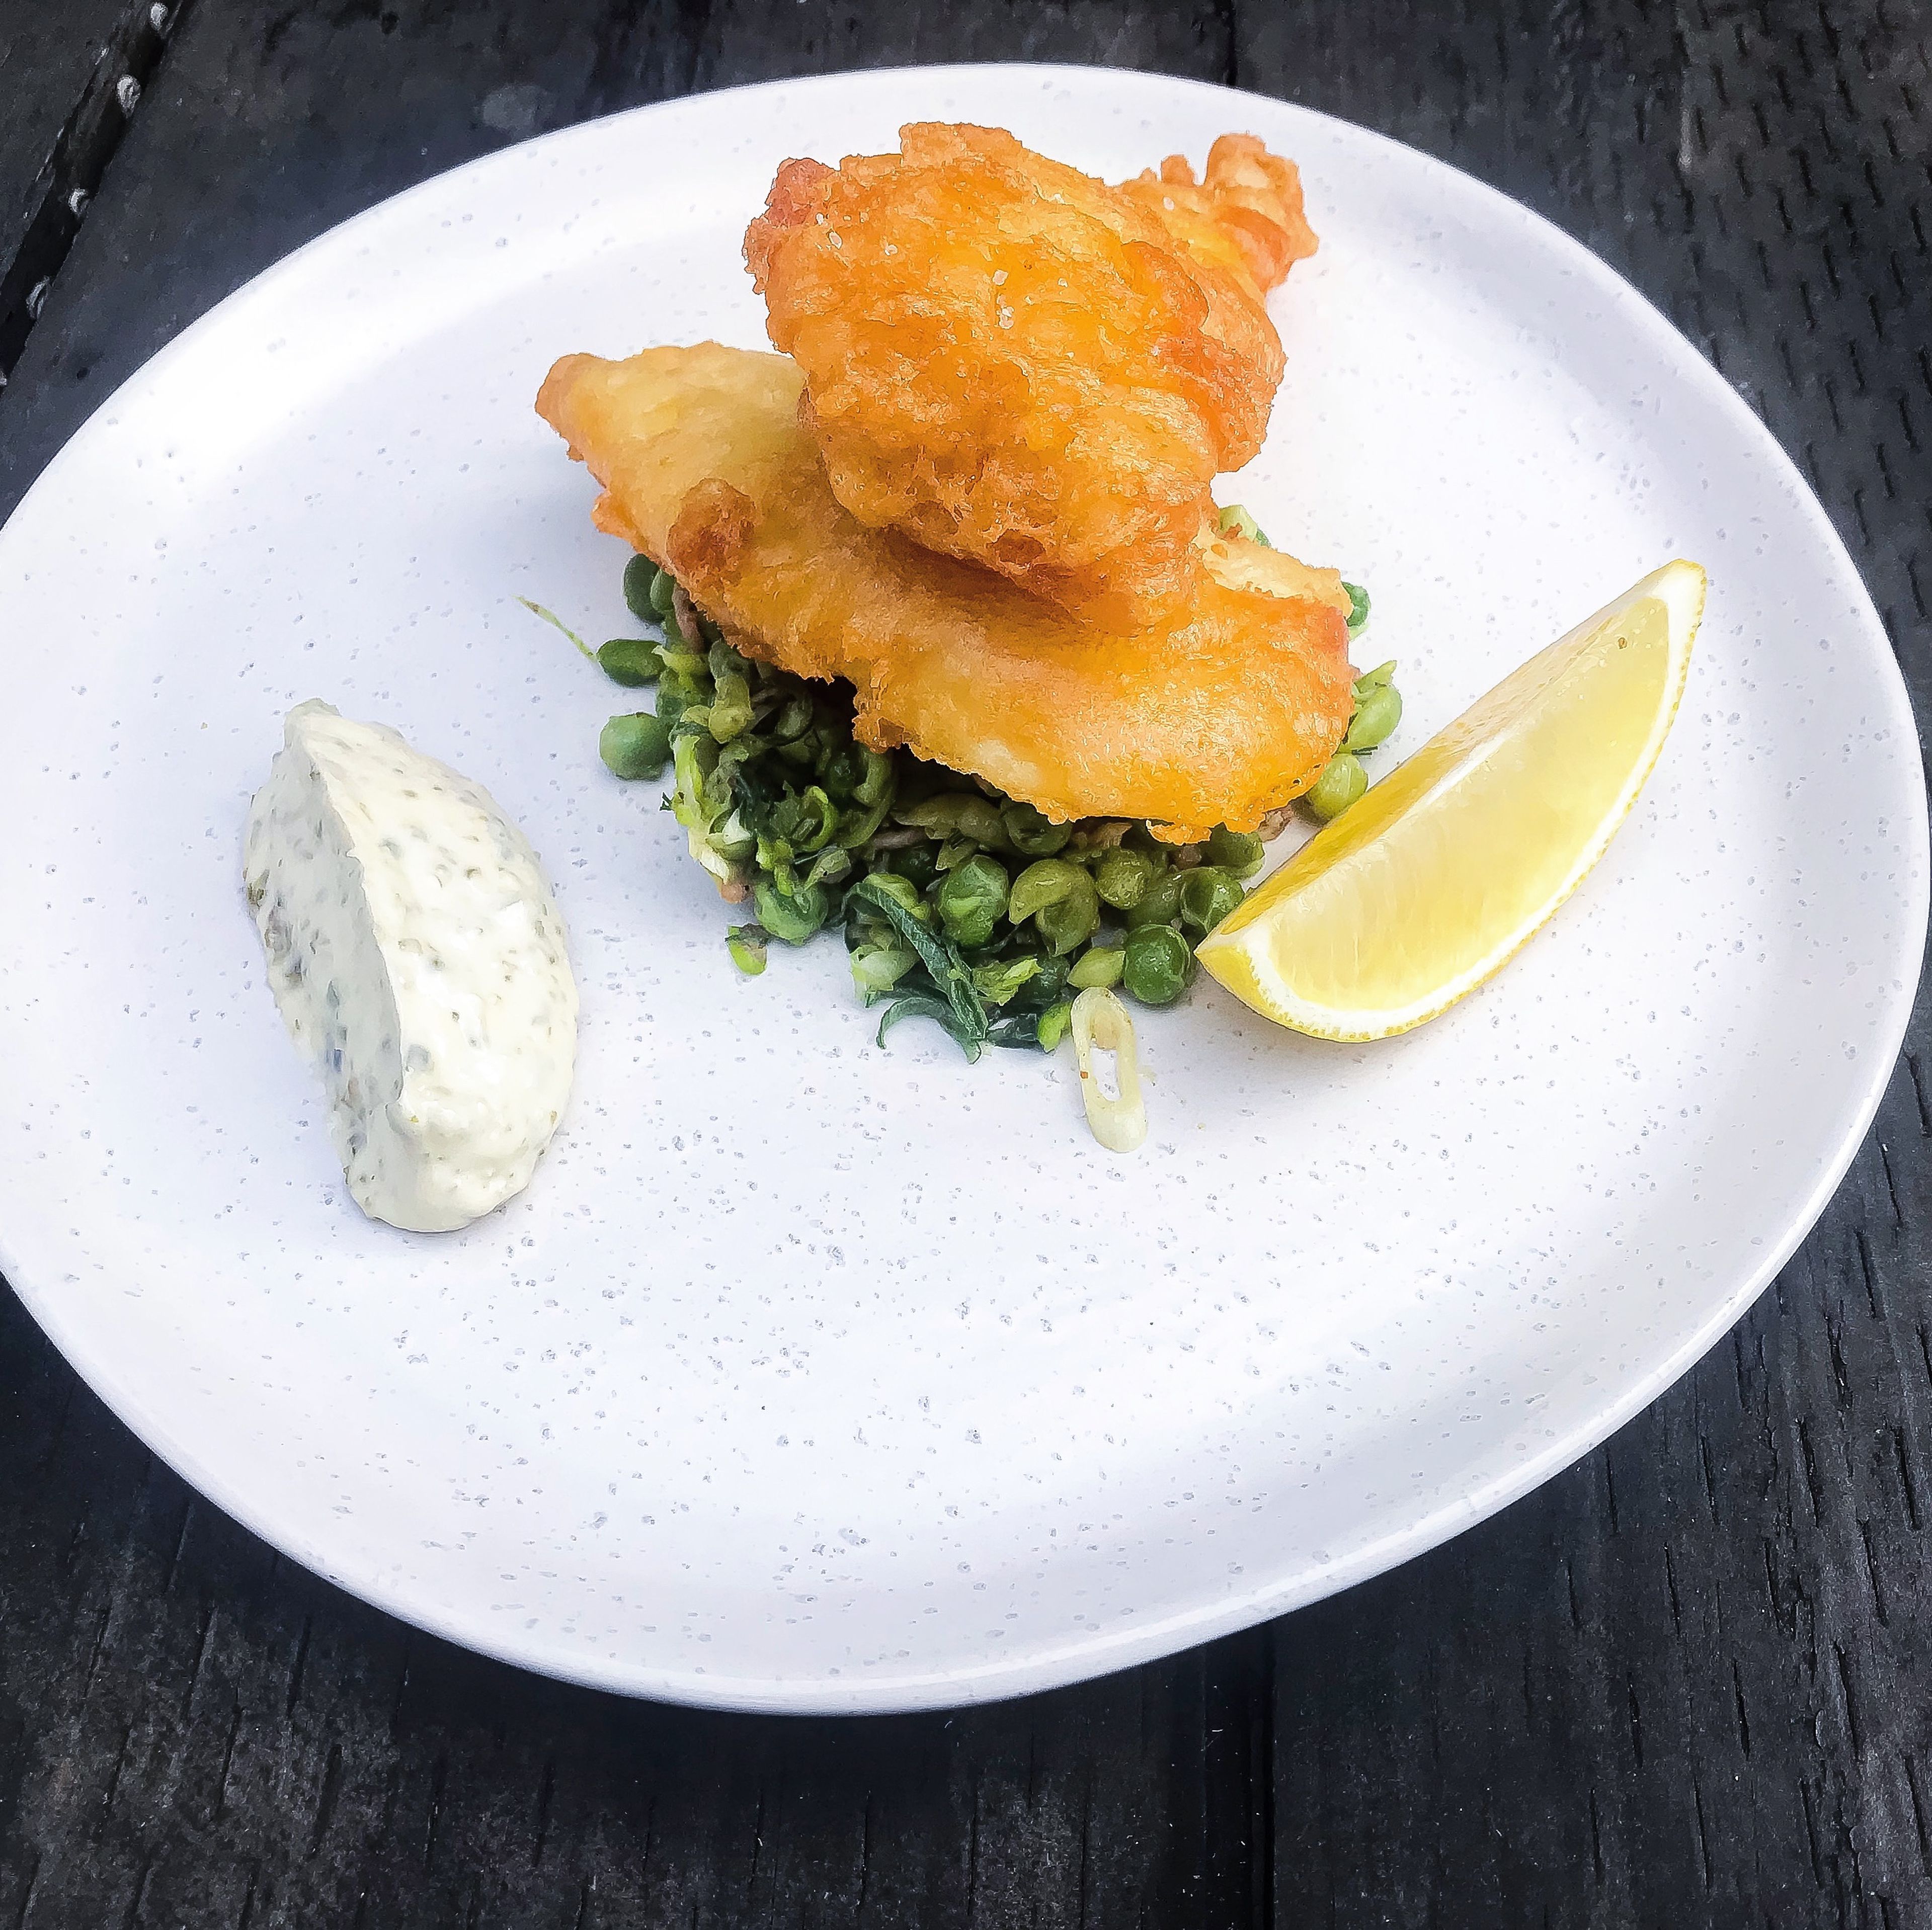 To serve, place the fish on top of the crushed peas and serve with a wedge of lemon and a healthy dollop of tartare sauce